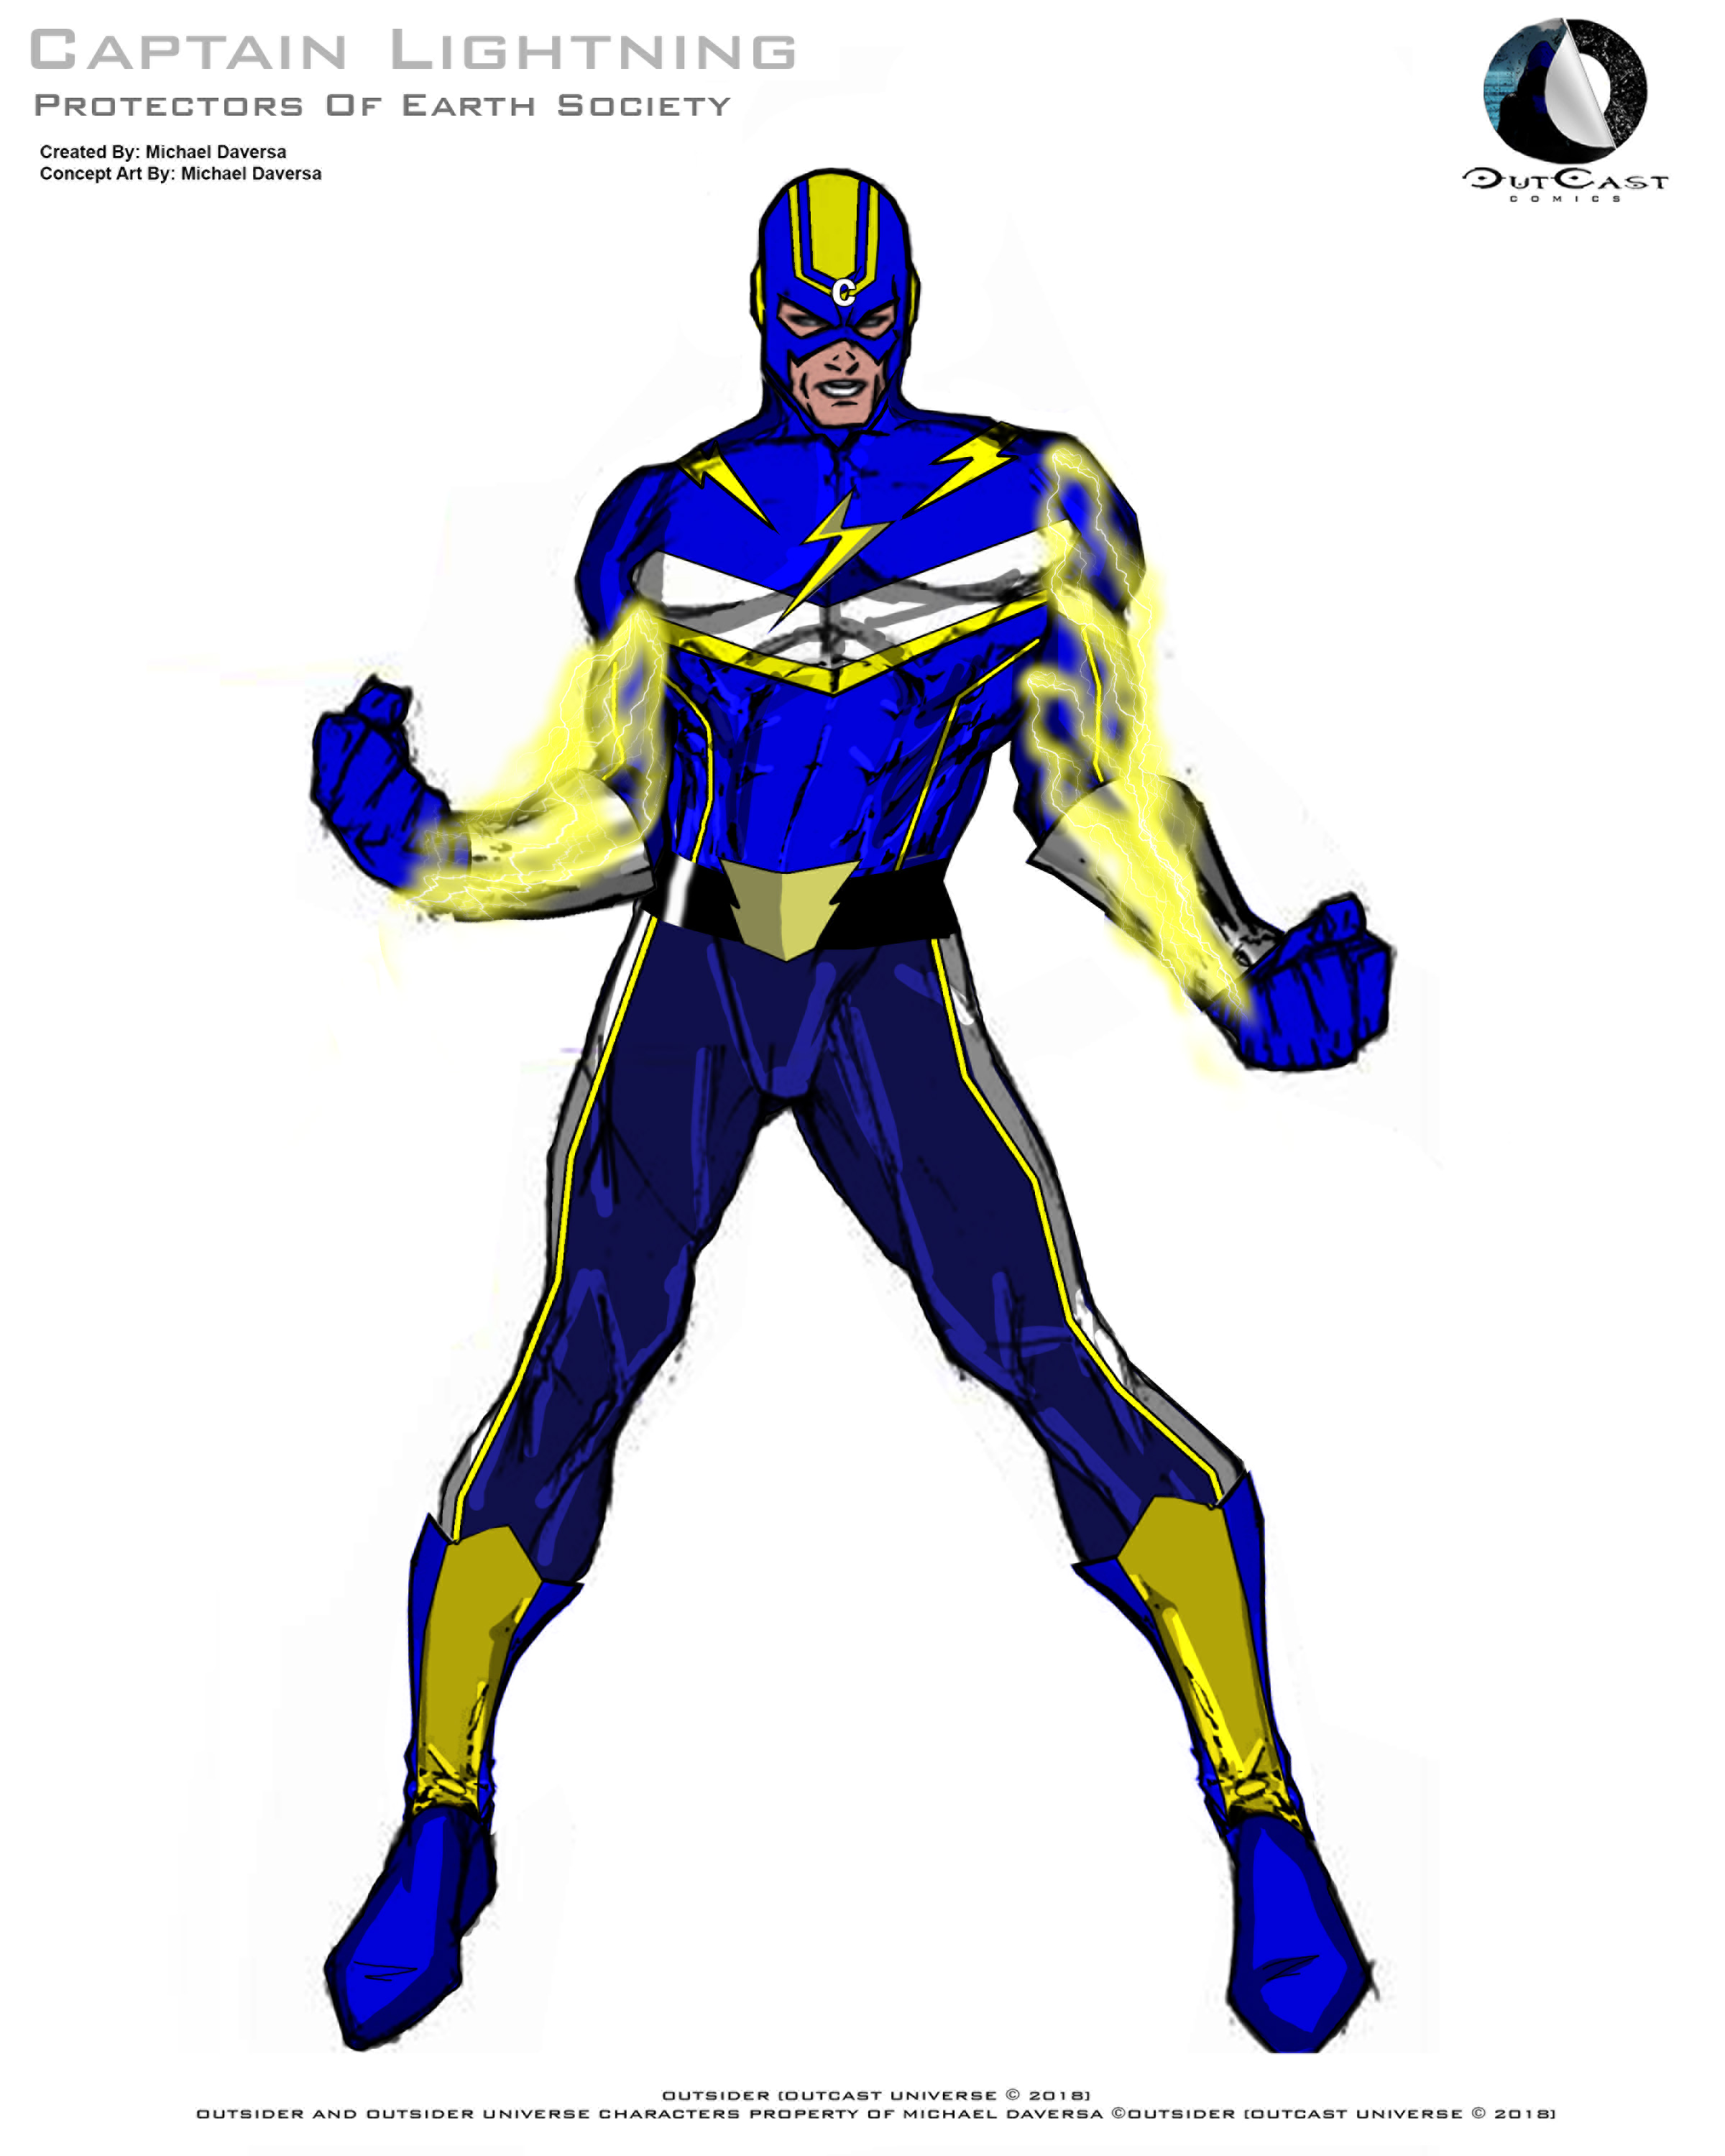 Captain Lightning 2 [Protectors of Earth Society.] by Outsider2299 on  DeviantArt